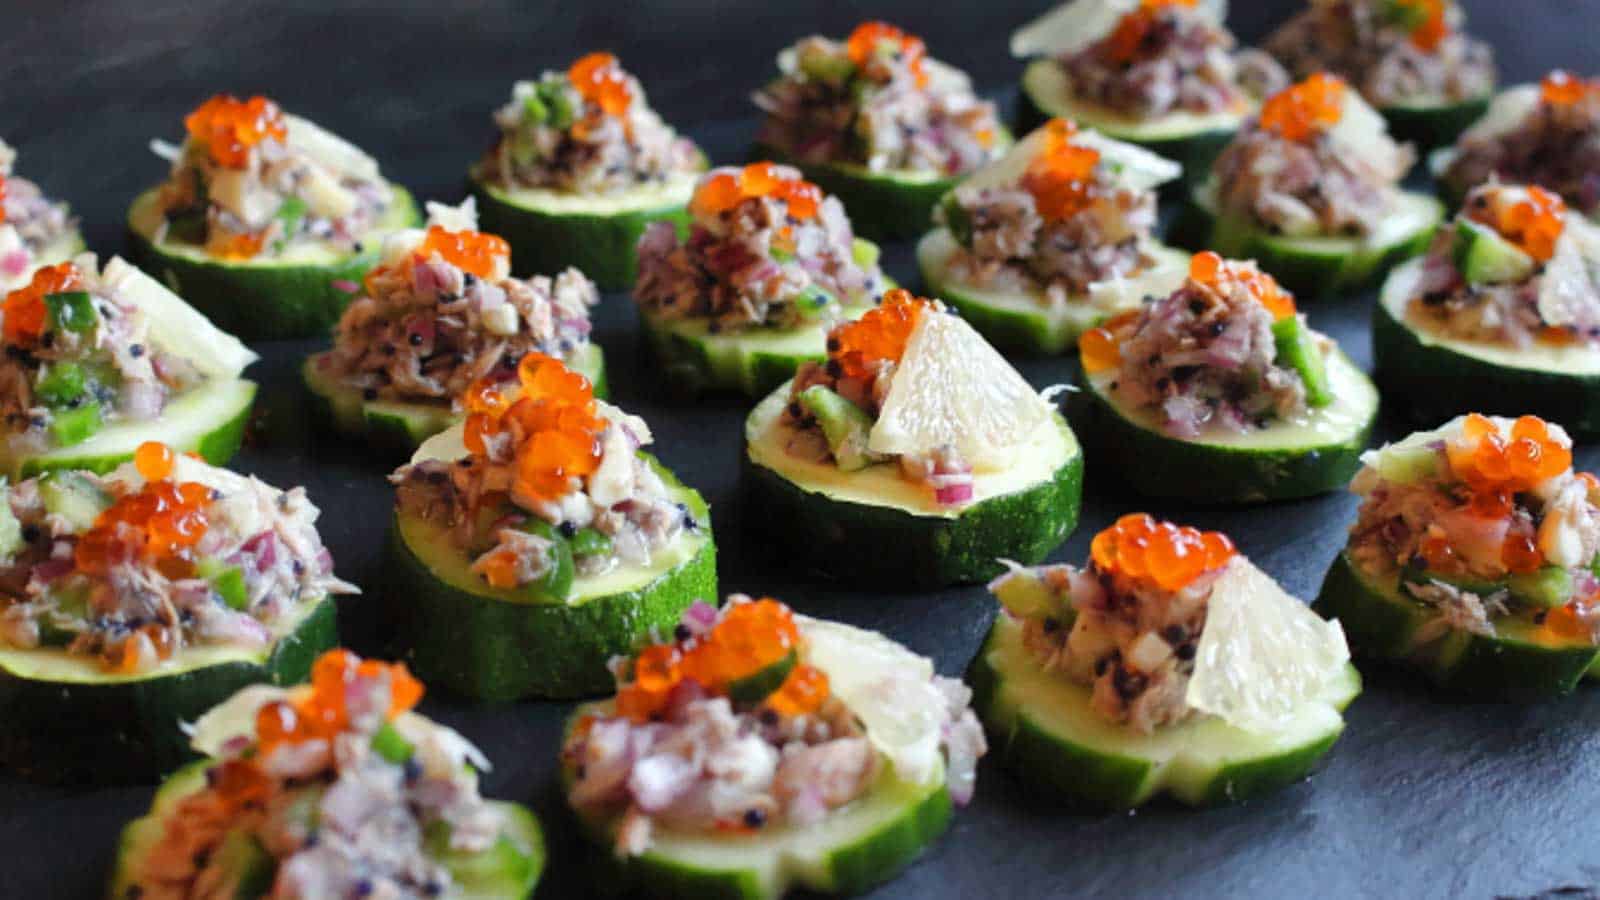 <p>For a lazy yet protein-packed breakfast, turn to Protein-Packed Tuna Salad. Effortlessly assemble a satisfying dish that combines the goodness of tuna with a low-carb twist. It’s a quick and easy option for those busy mornings.<br><strong>Get the Recipe: </strong><a href="https://www.lowcarb-nocarb.com/tuna-mix/?utm_source=msn&utm_medium=page&utm_campaign=18 extremely quick and easy breakfast ideas for lazy people">Protein-Packed Tuna Salad</a></p>